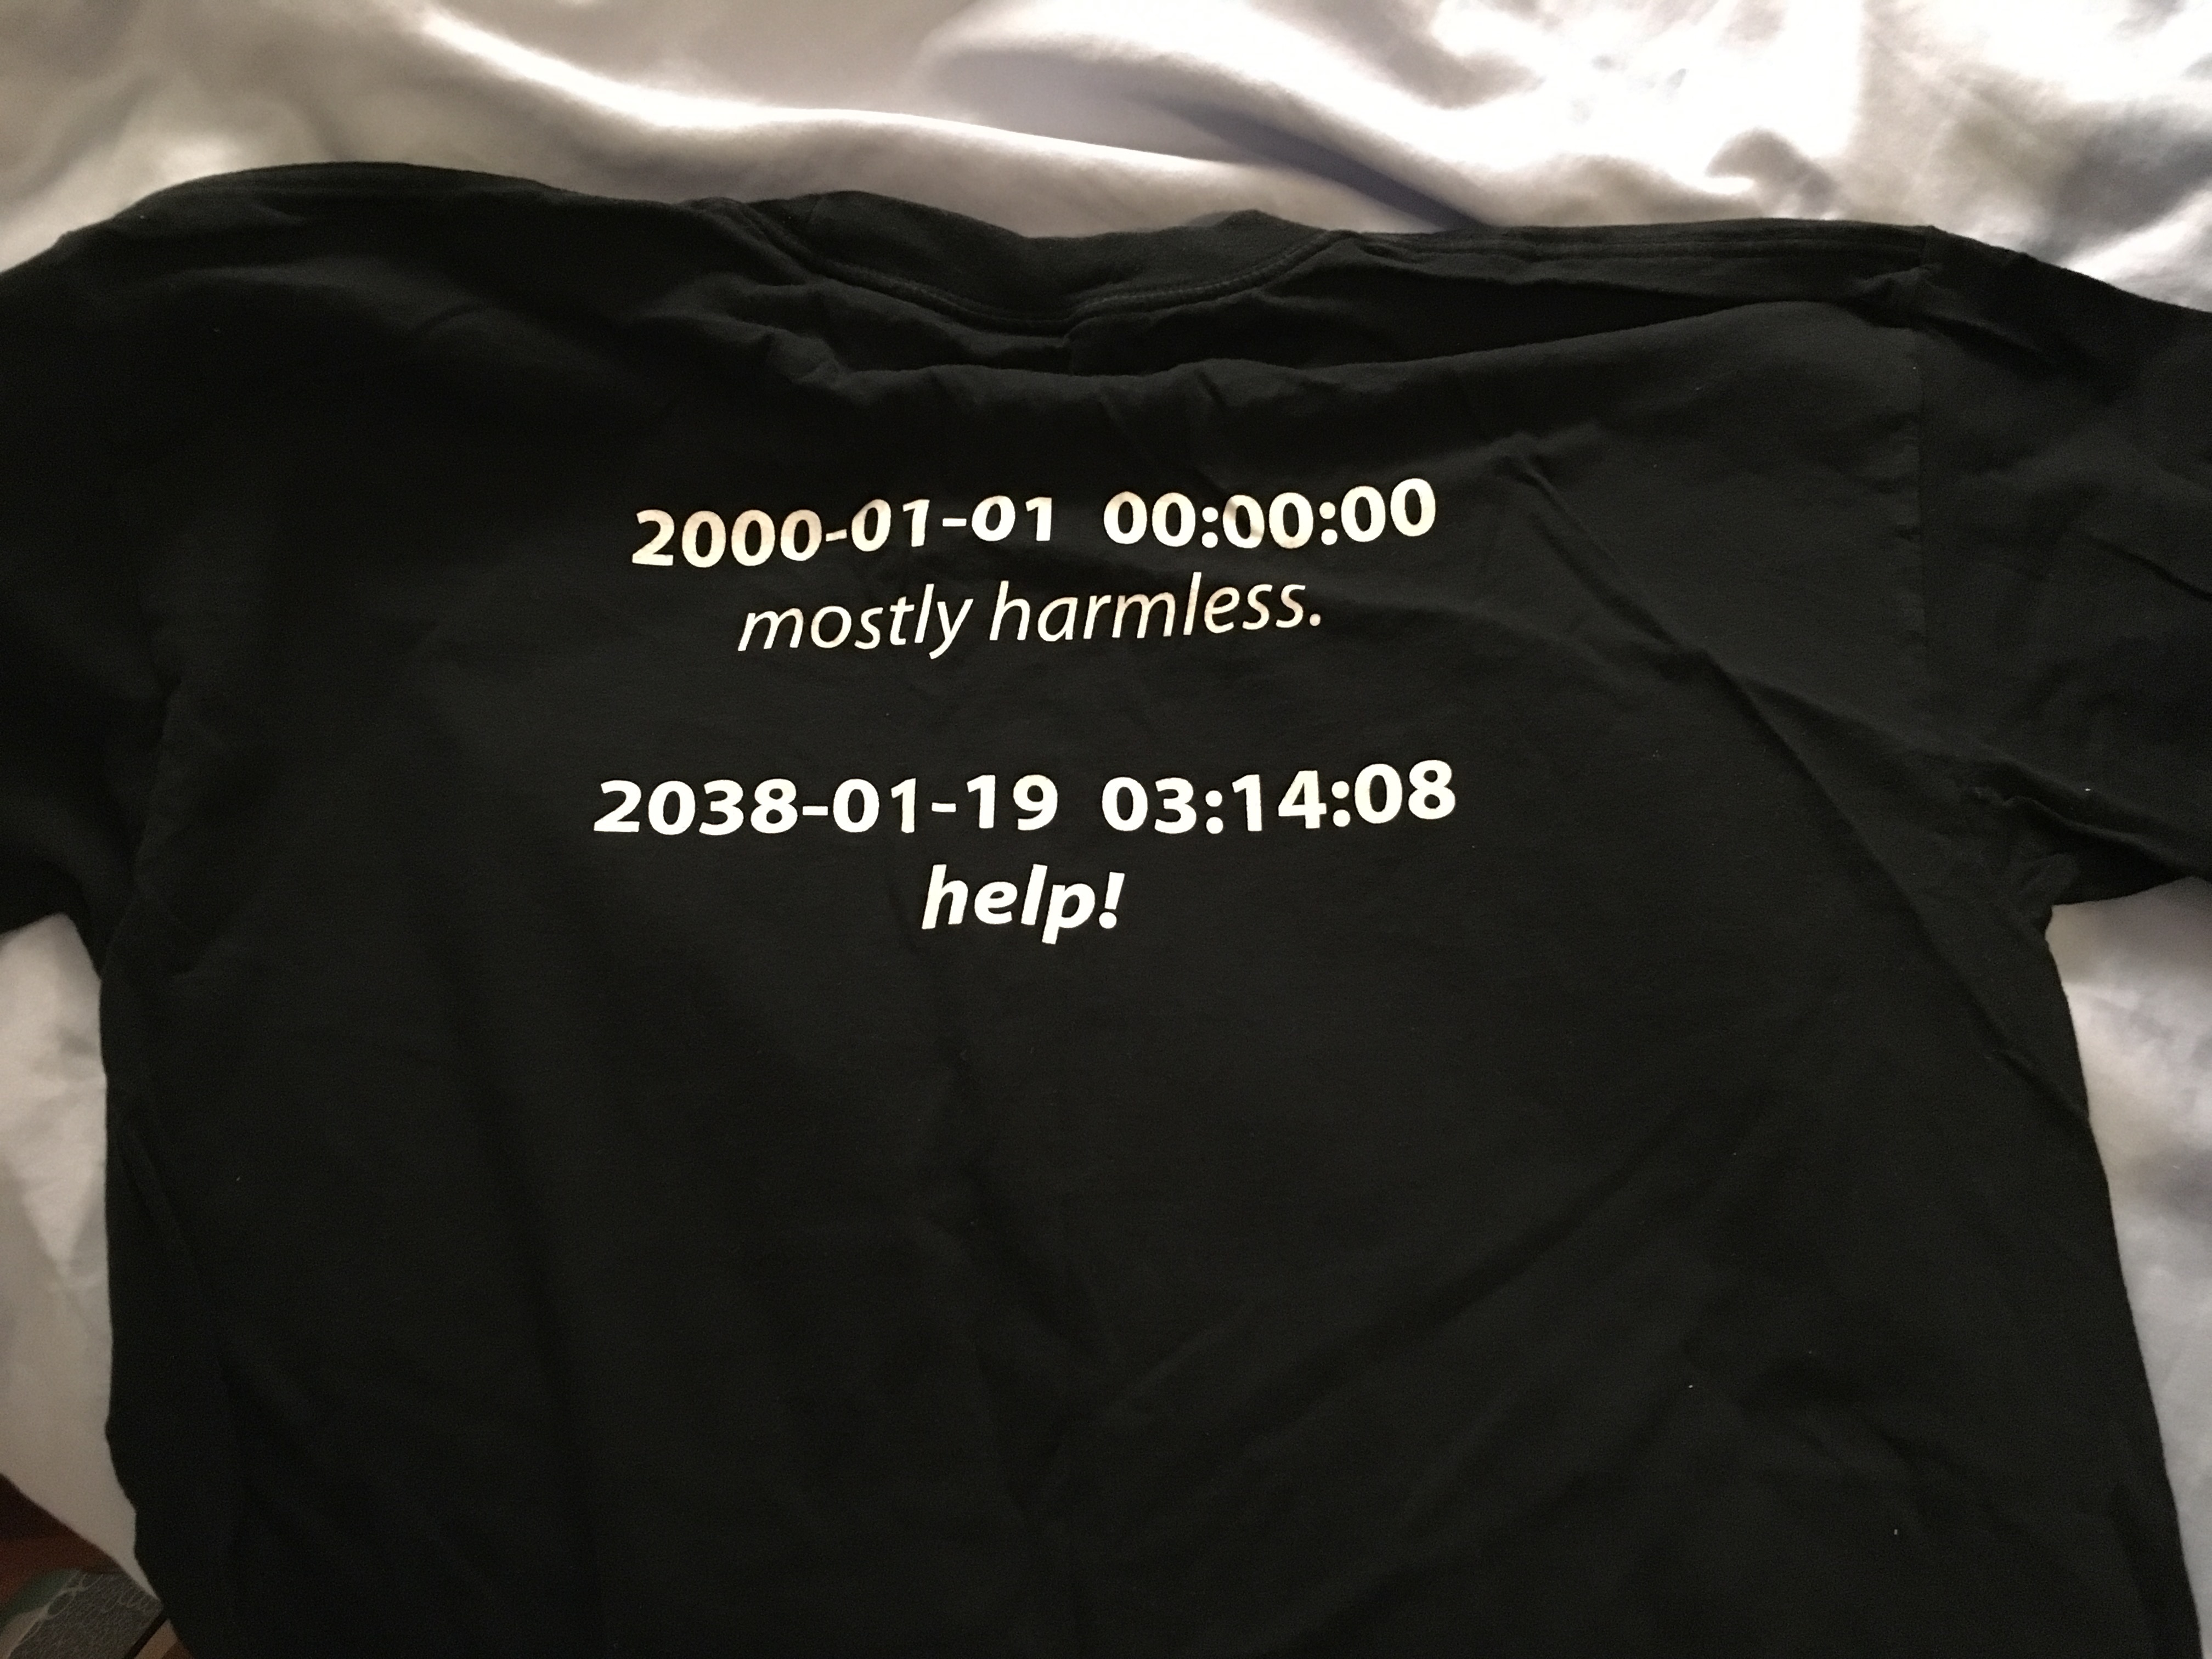 Picture of a T-shirt saying that Y2K
is harmless but that 2038 is dangerous